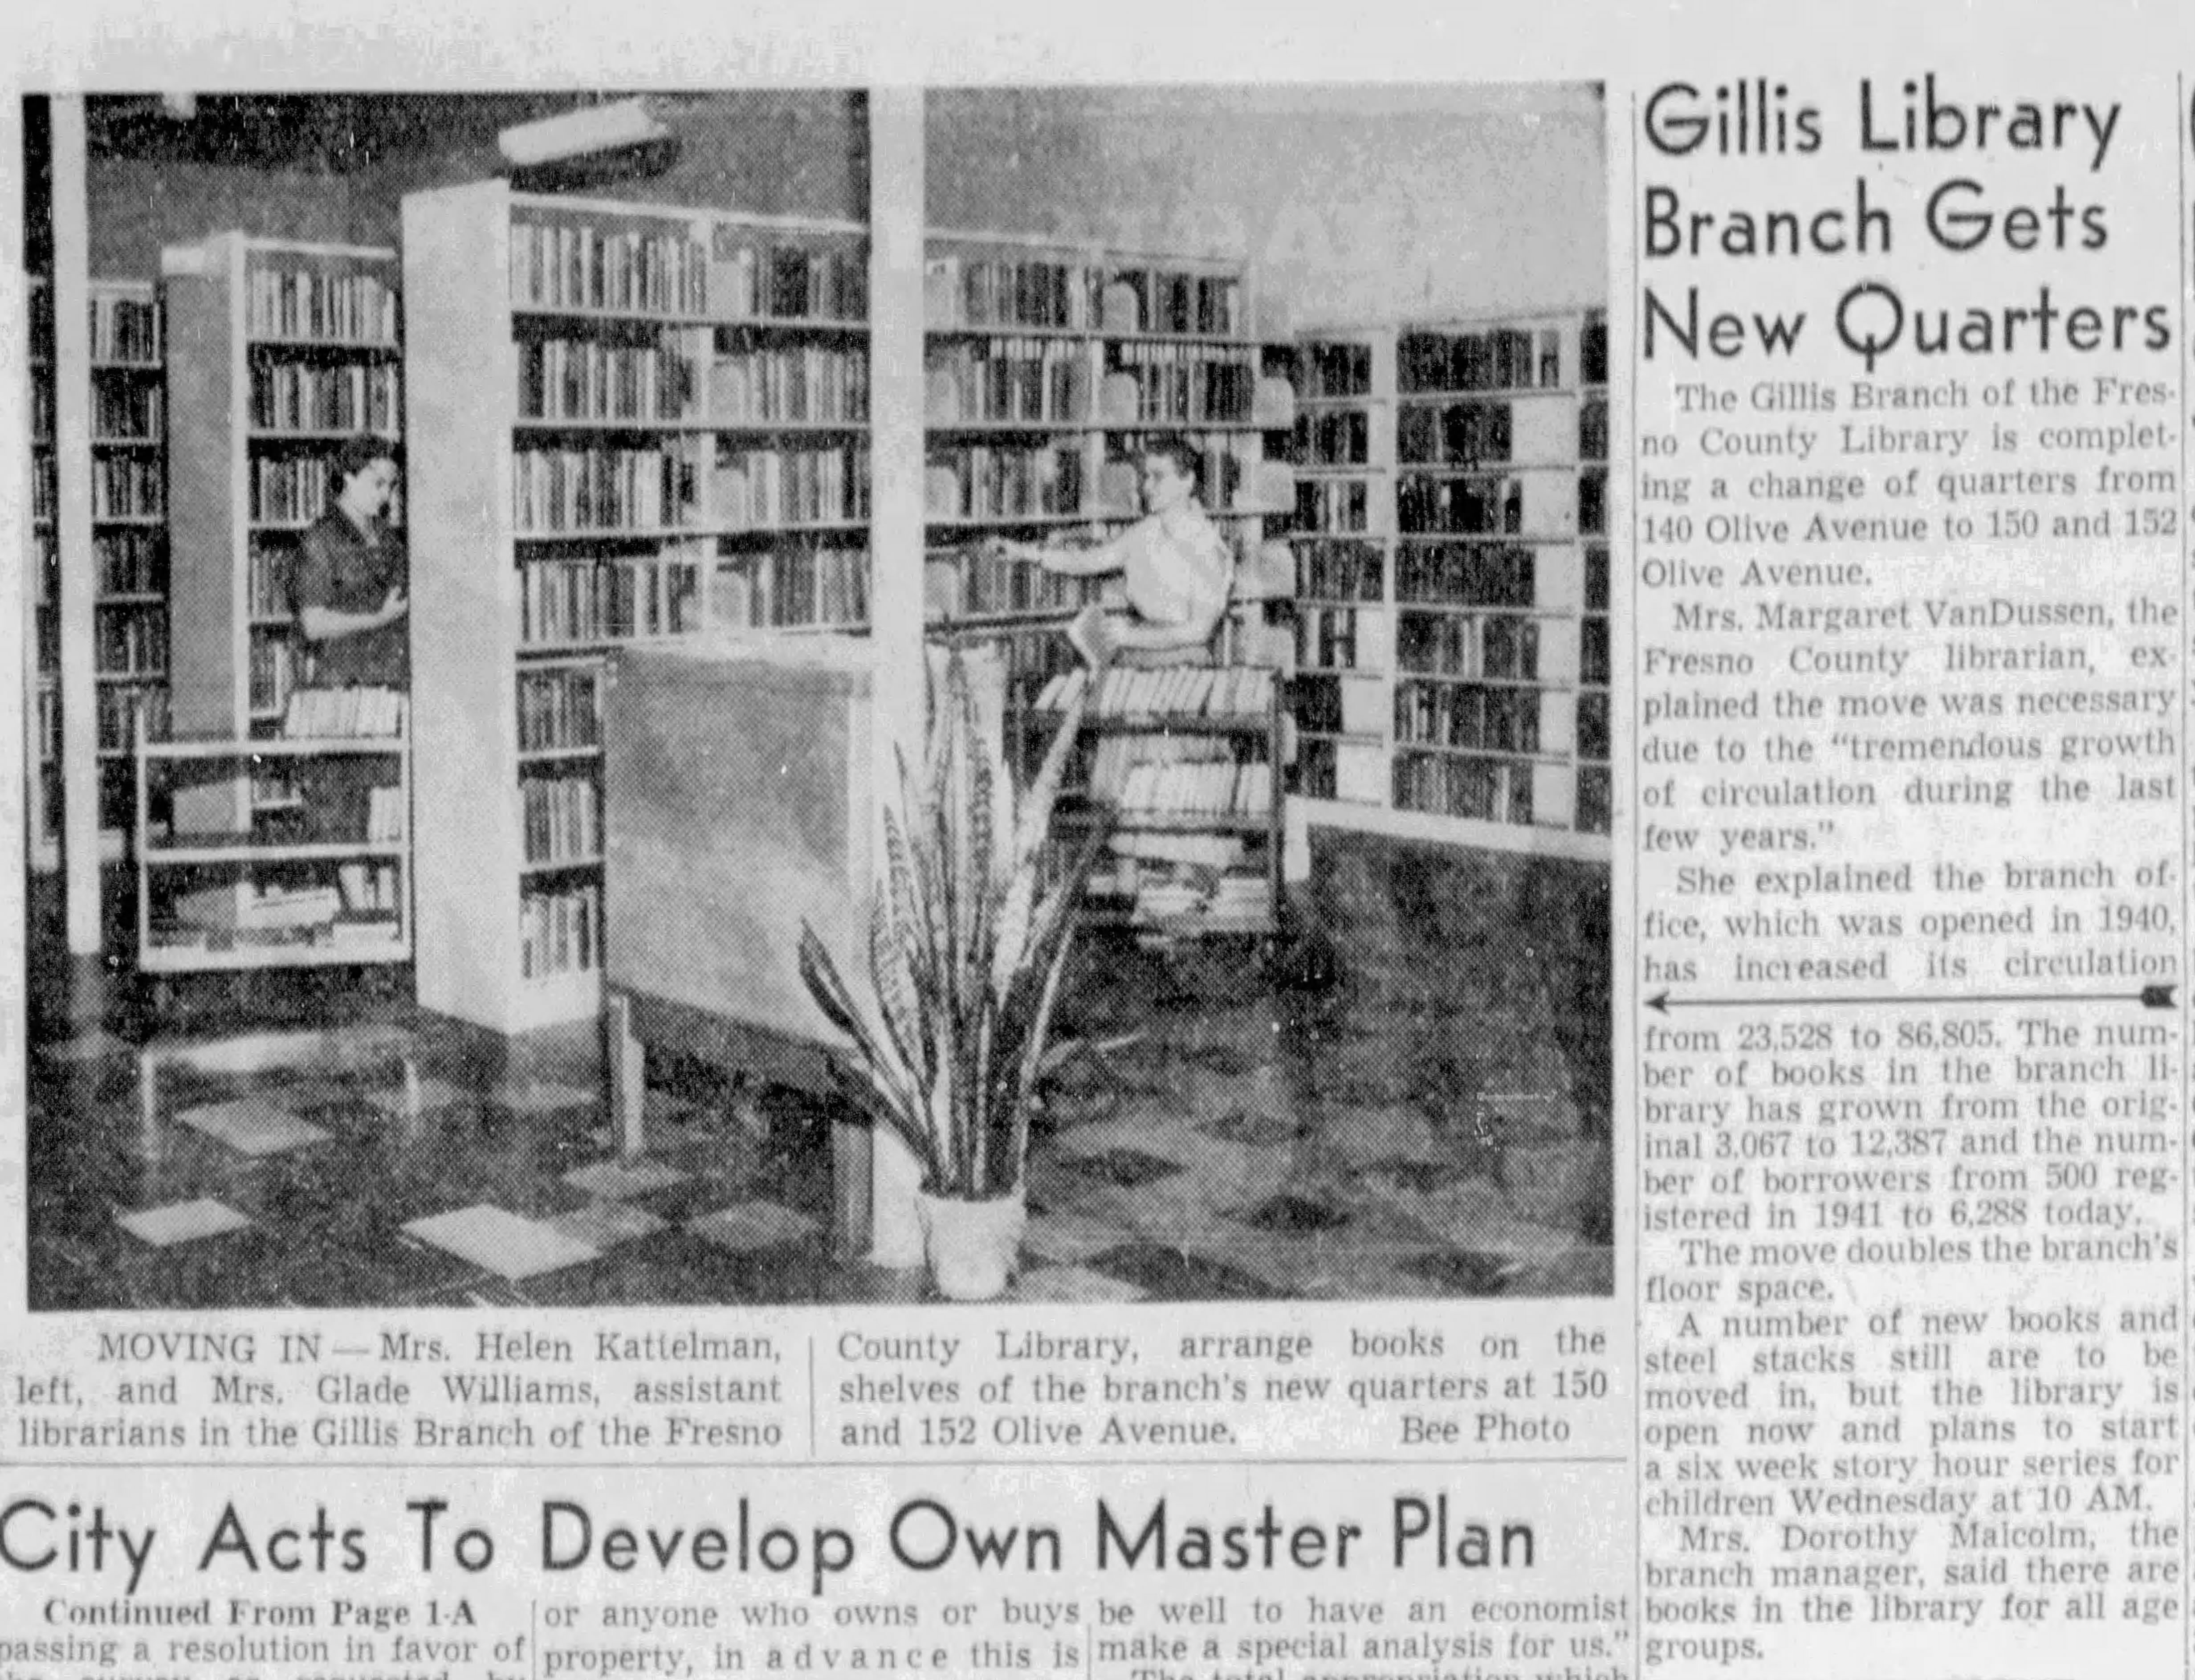 A photocopy of an article from the Fresno Bee Repupblican on July 8th, 1955, titled, 'Gillis Library Branch Gets New Quarters'. The article contains a black-and-white photograph of the inside of the library, where two assistant librarians are arranging books on the shelves.